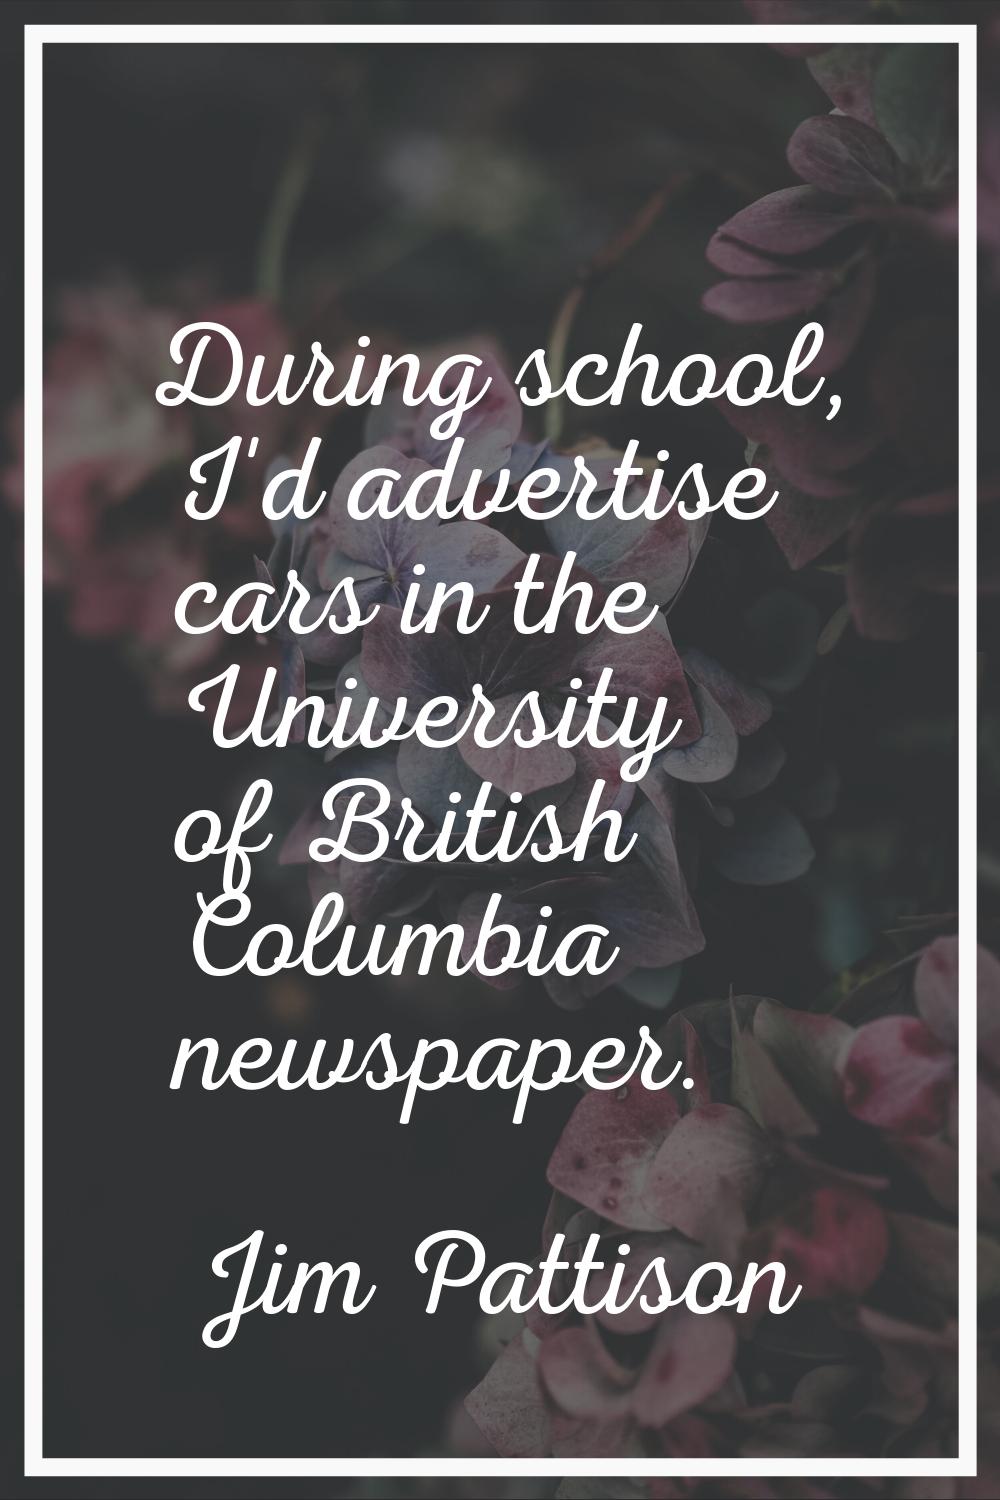 During school, I'd advertise cars in the University of British Columbia newspaper.